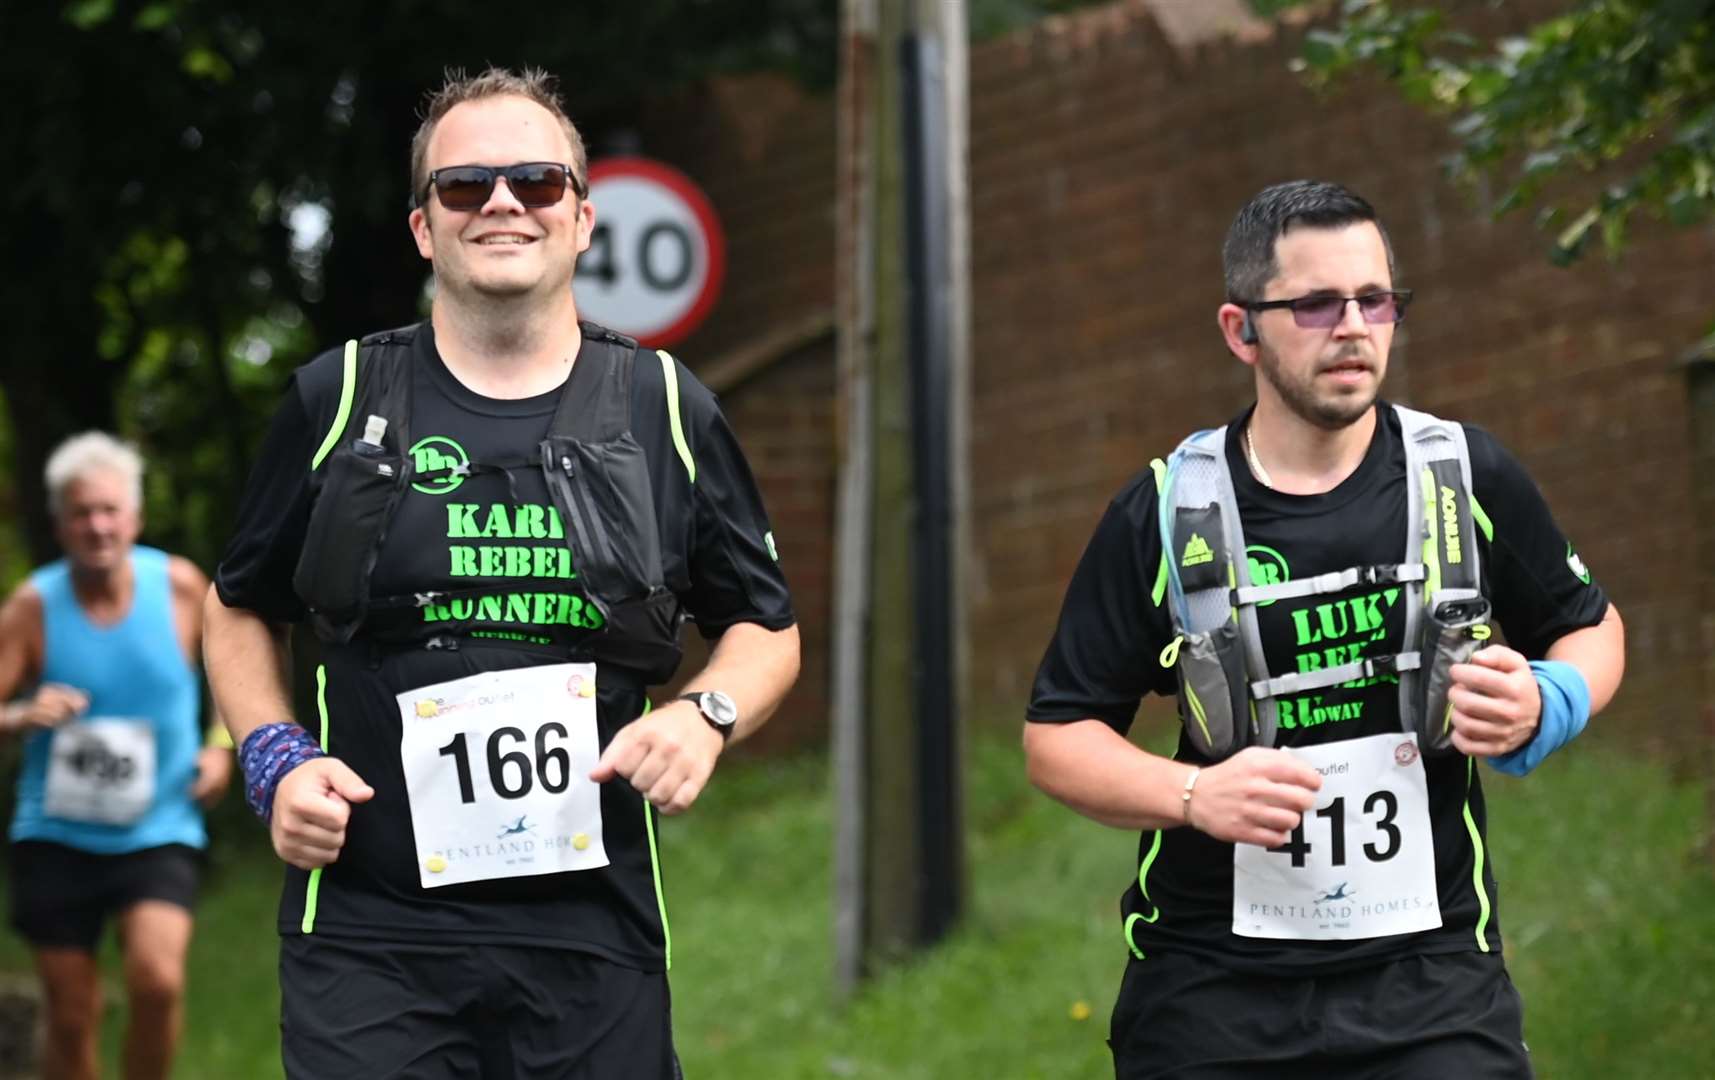 Karl Grimble (166) and Luke Tanton (413) from Rebel Runners Medway. Picture: Barry Goodwin (49789918)